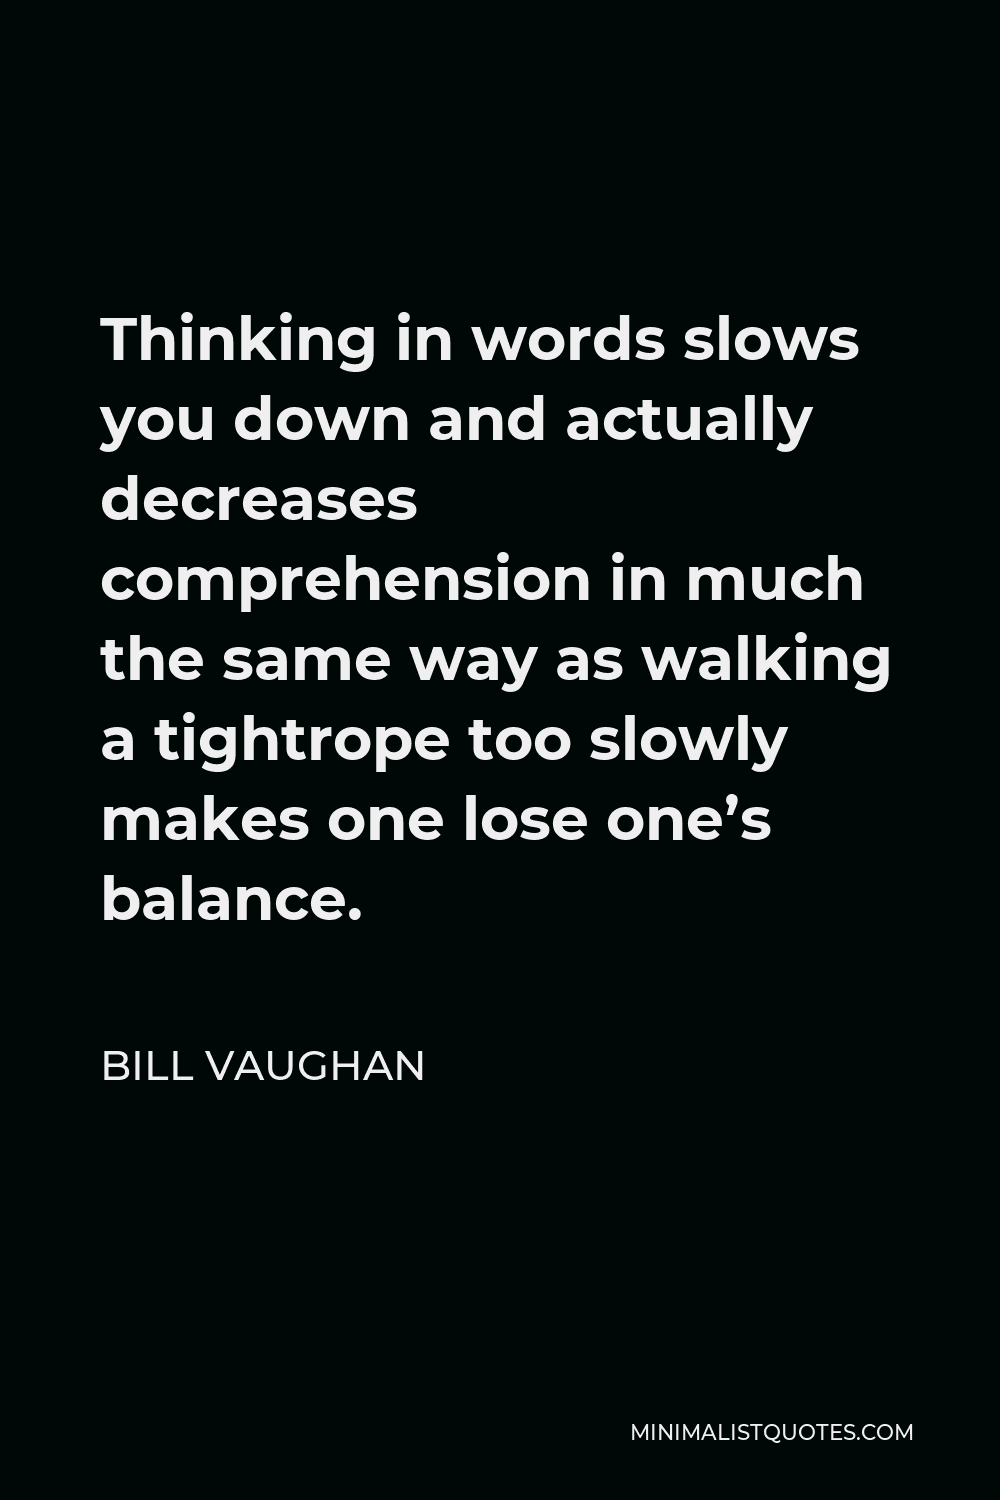 Bill Vaughan Quote - Thinking in words slows you down and actually decreases comprehension in much the same way as walking a tightrope too slowly makes one lose one’s balance.